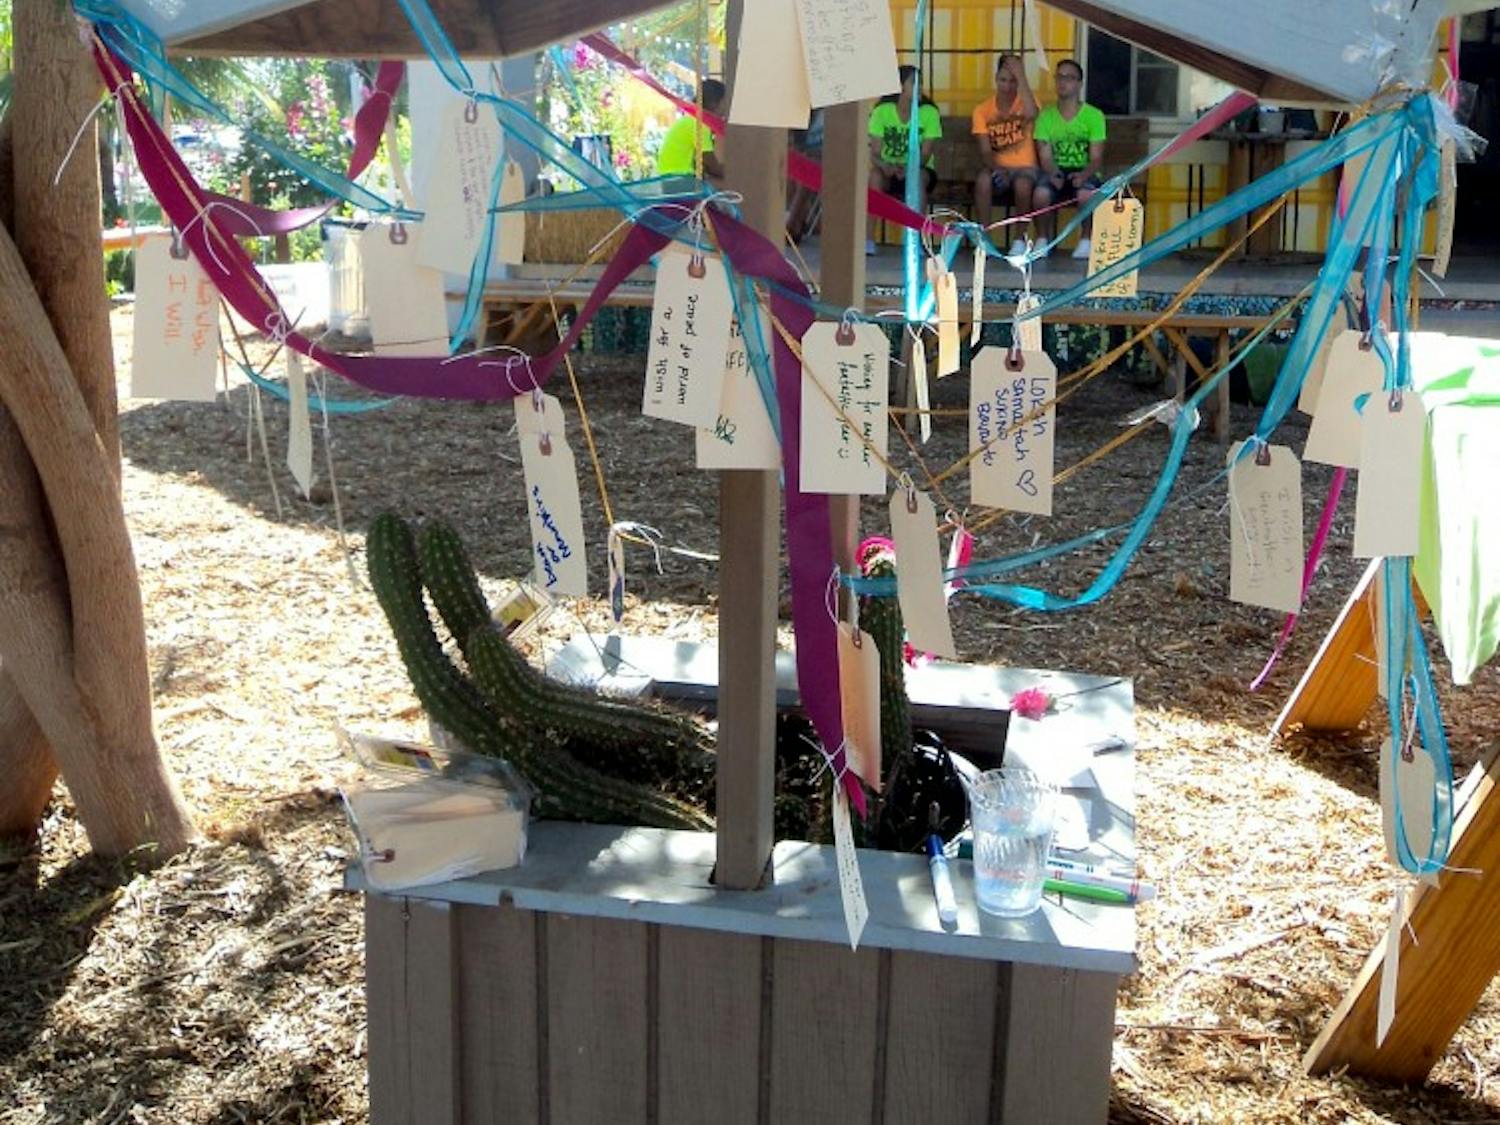 The cute little wishing well where swappers and volunteers shared their thoughts. Photo by Alexandria Conrad